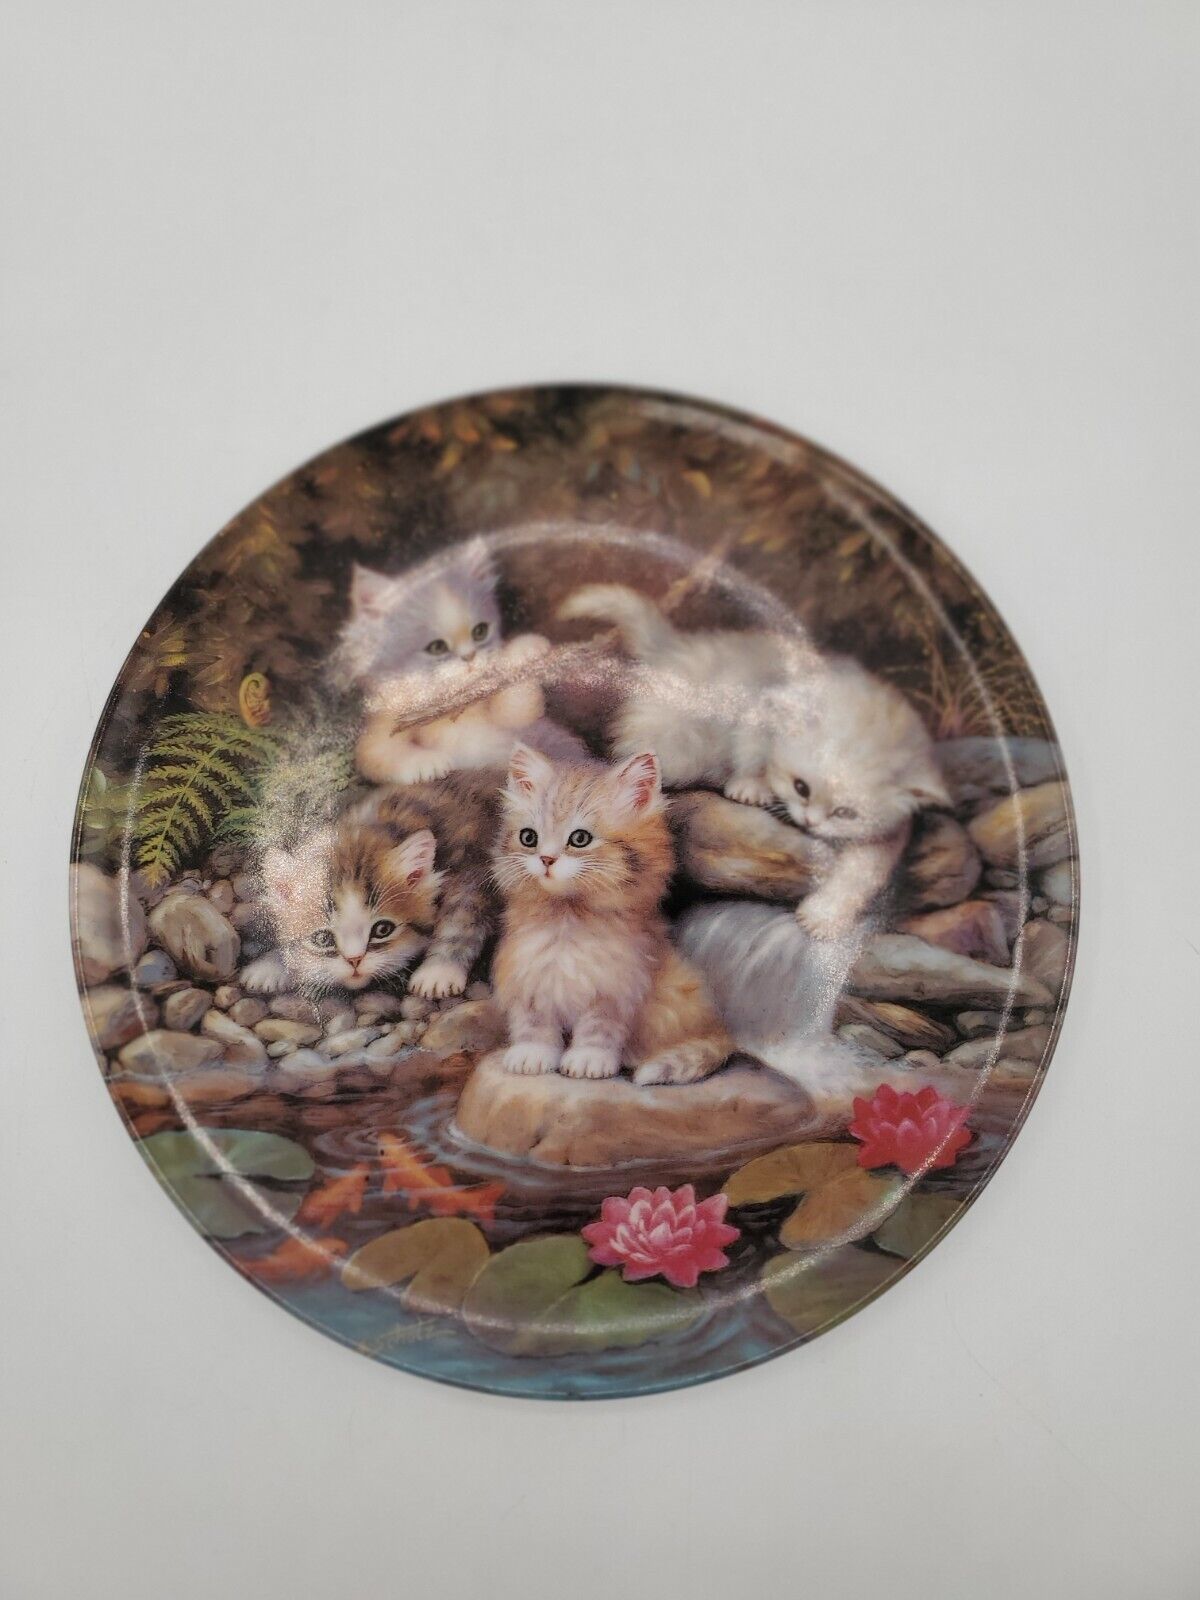 Kahla Germany By the Lily Pond Kitten Expedition Collector Plate 7.75